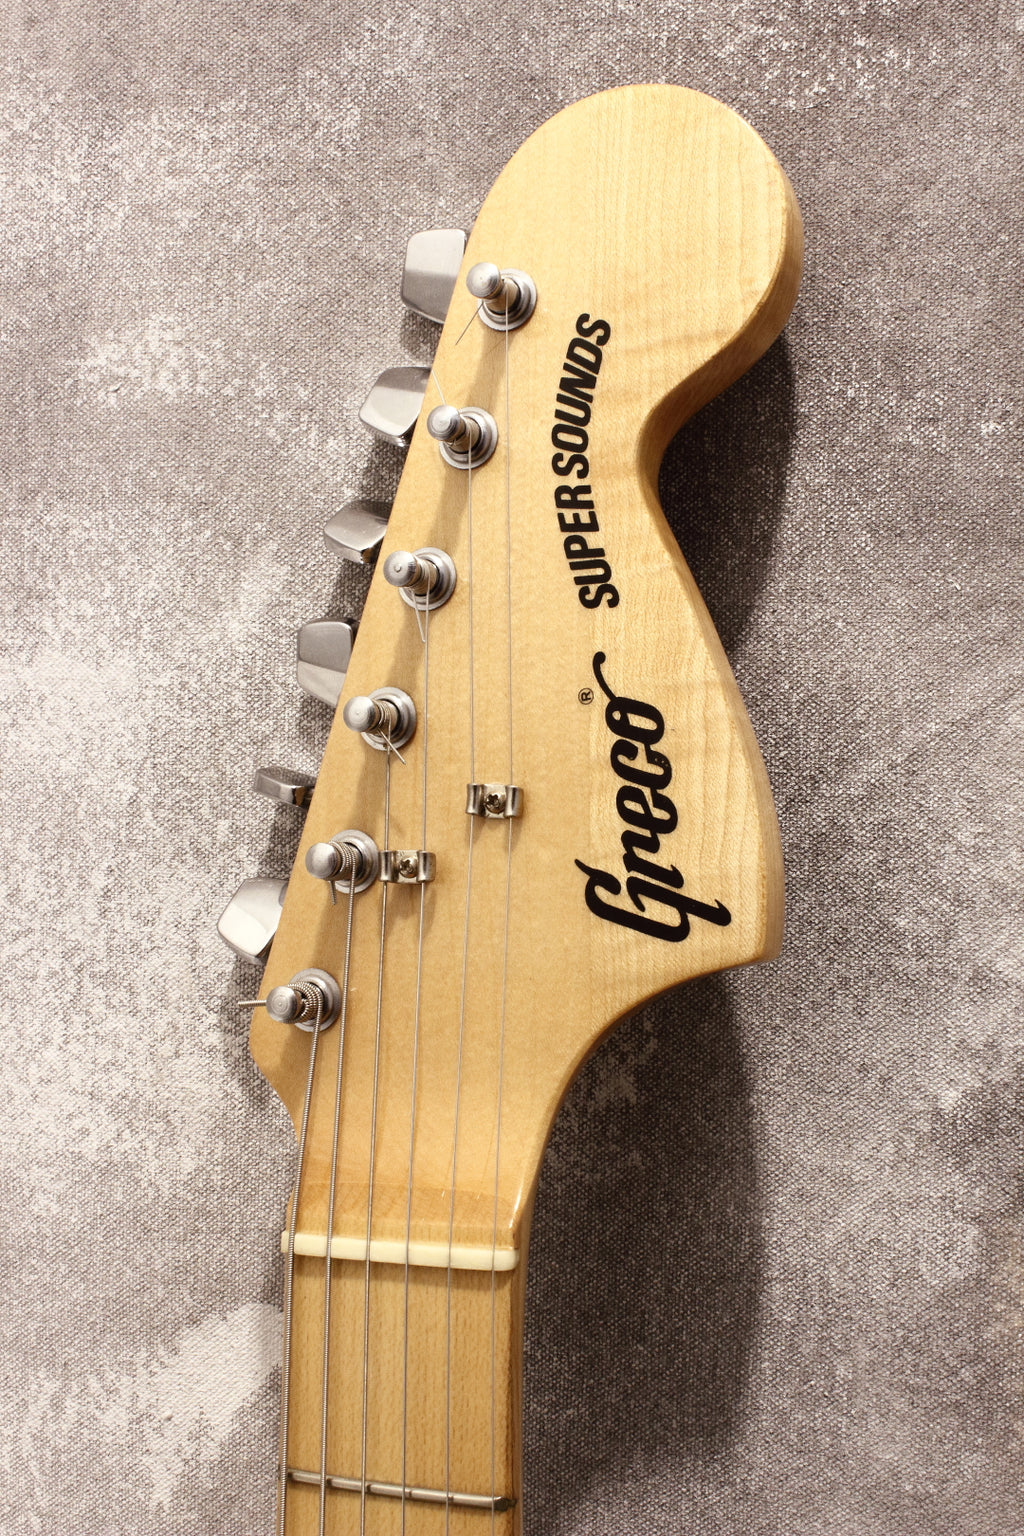 Greco SE500 SUPER SOUNDS 1977 Excel PU - ギター